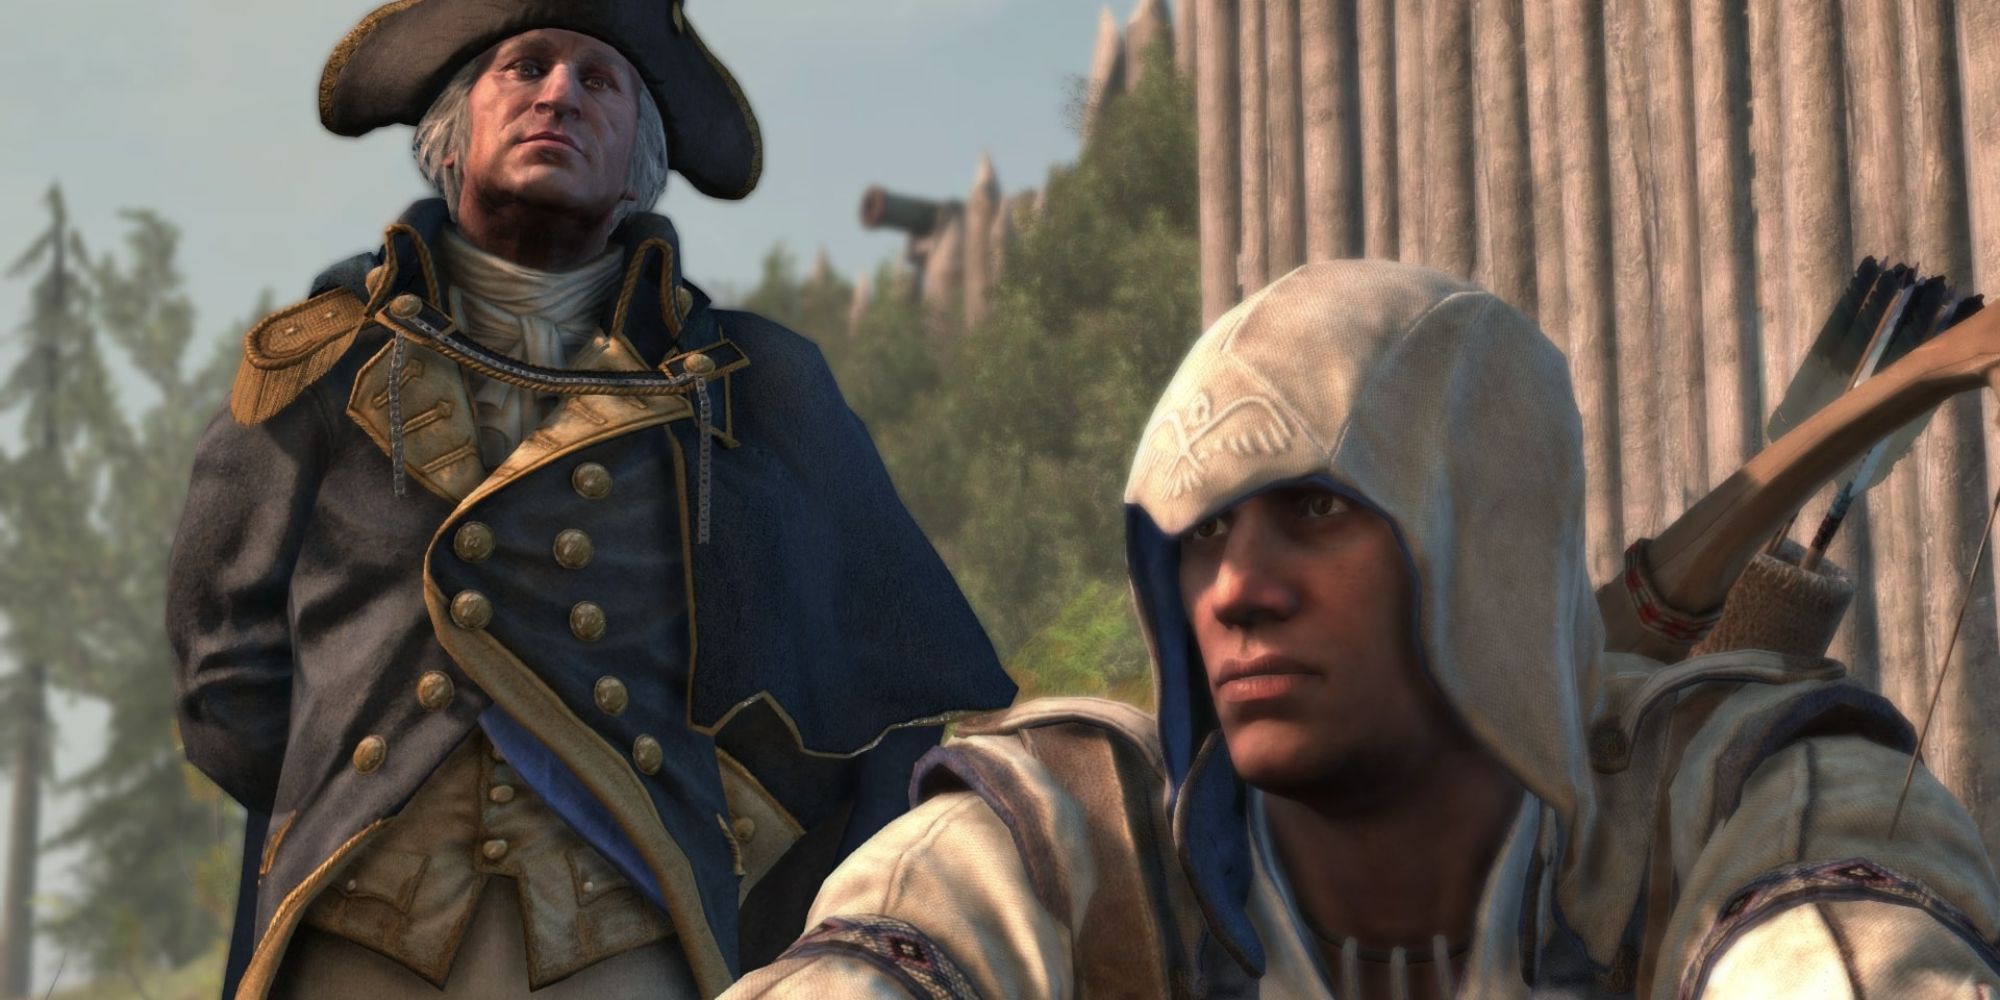 image of George Washington wearing a military uniform and Ratonhnhak ton in Assassins Creed III